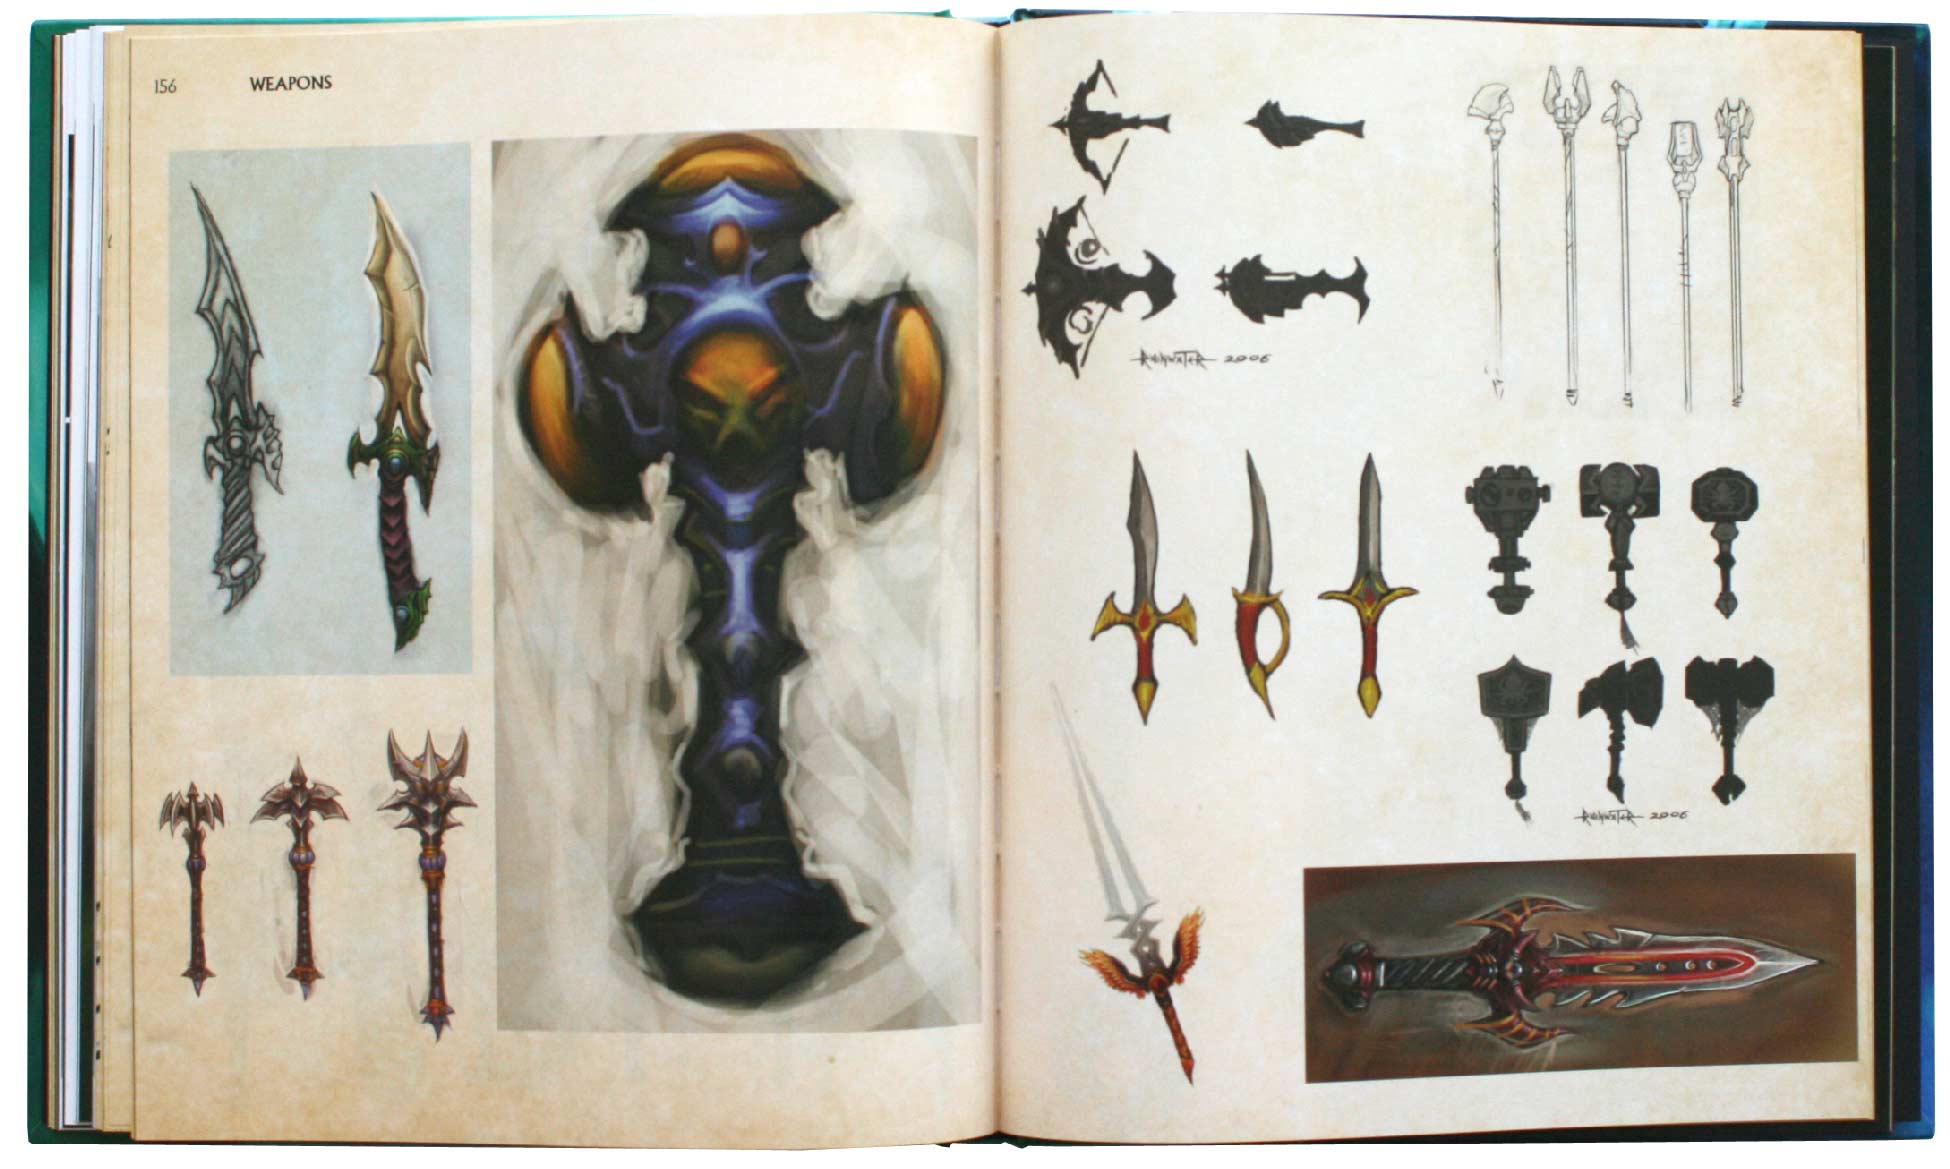 Page 156 et 157 de l'Art book : The Art of the Burning Crusade (World of Warcraft)